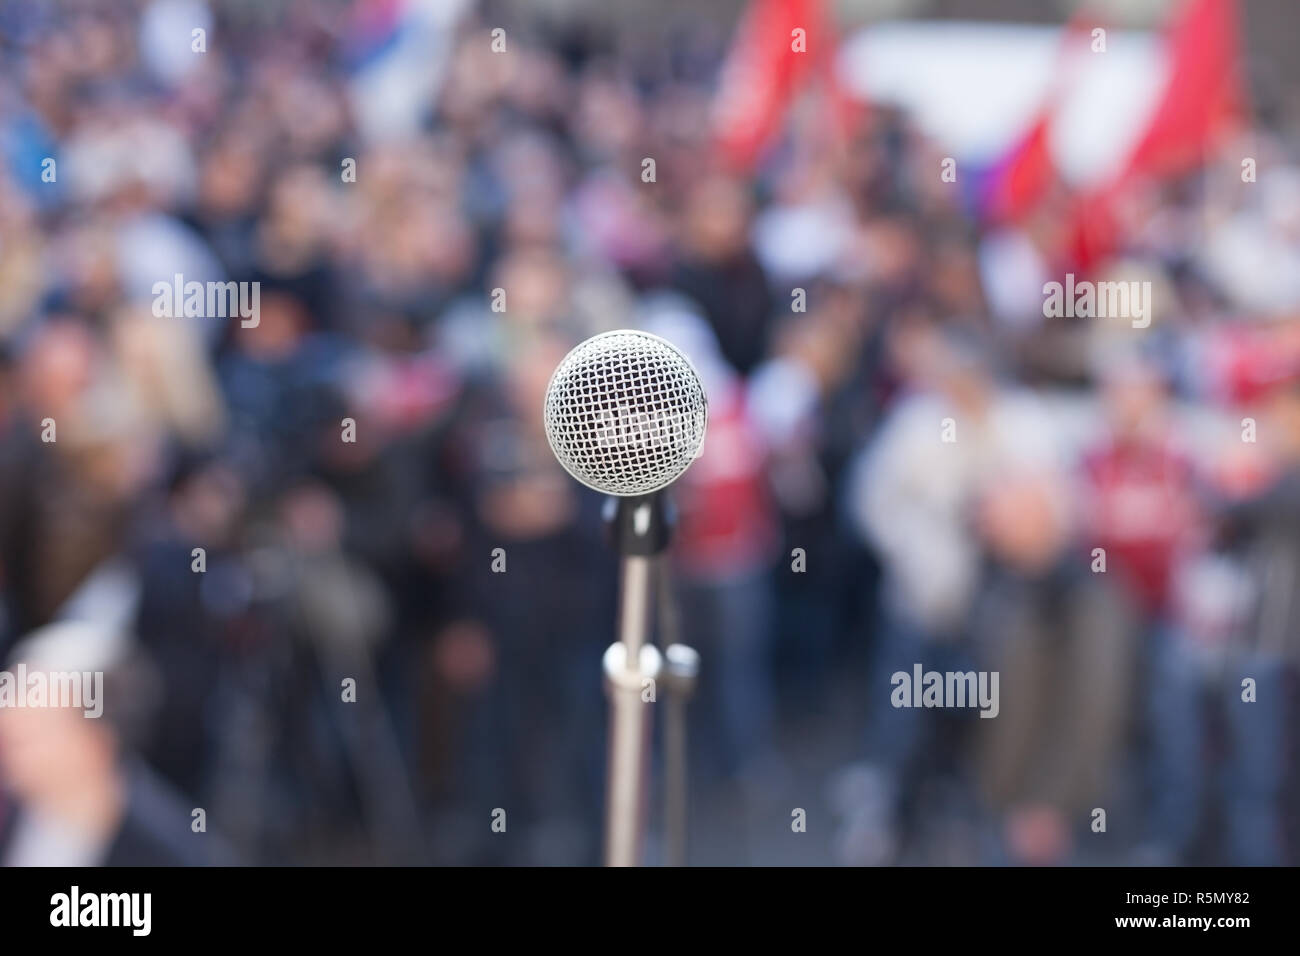 Protest. Public demonstration. Stock Photo